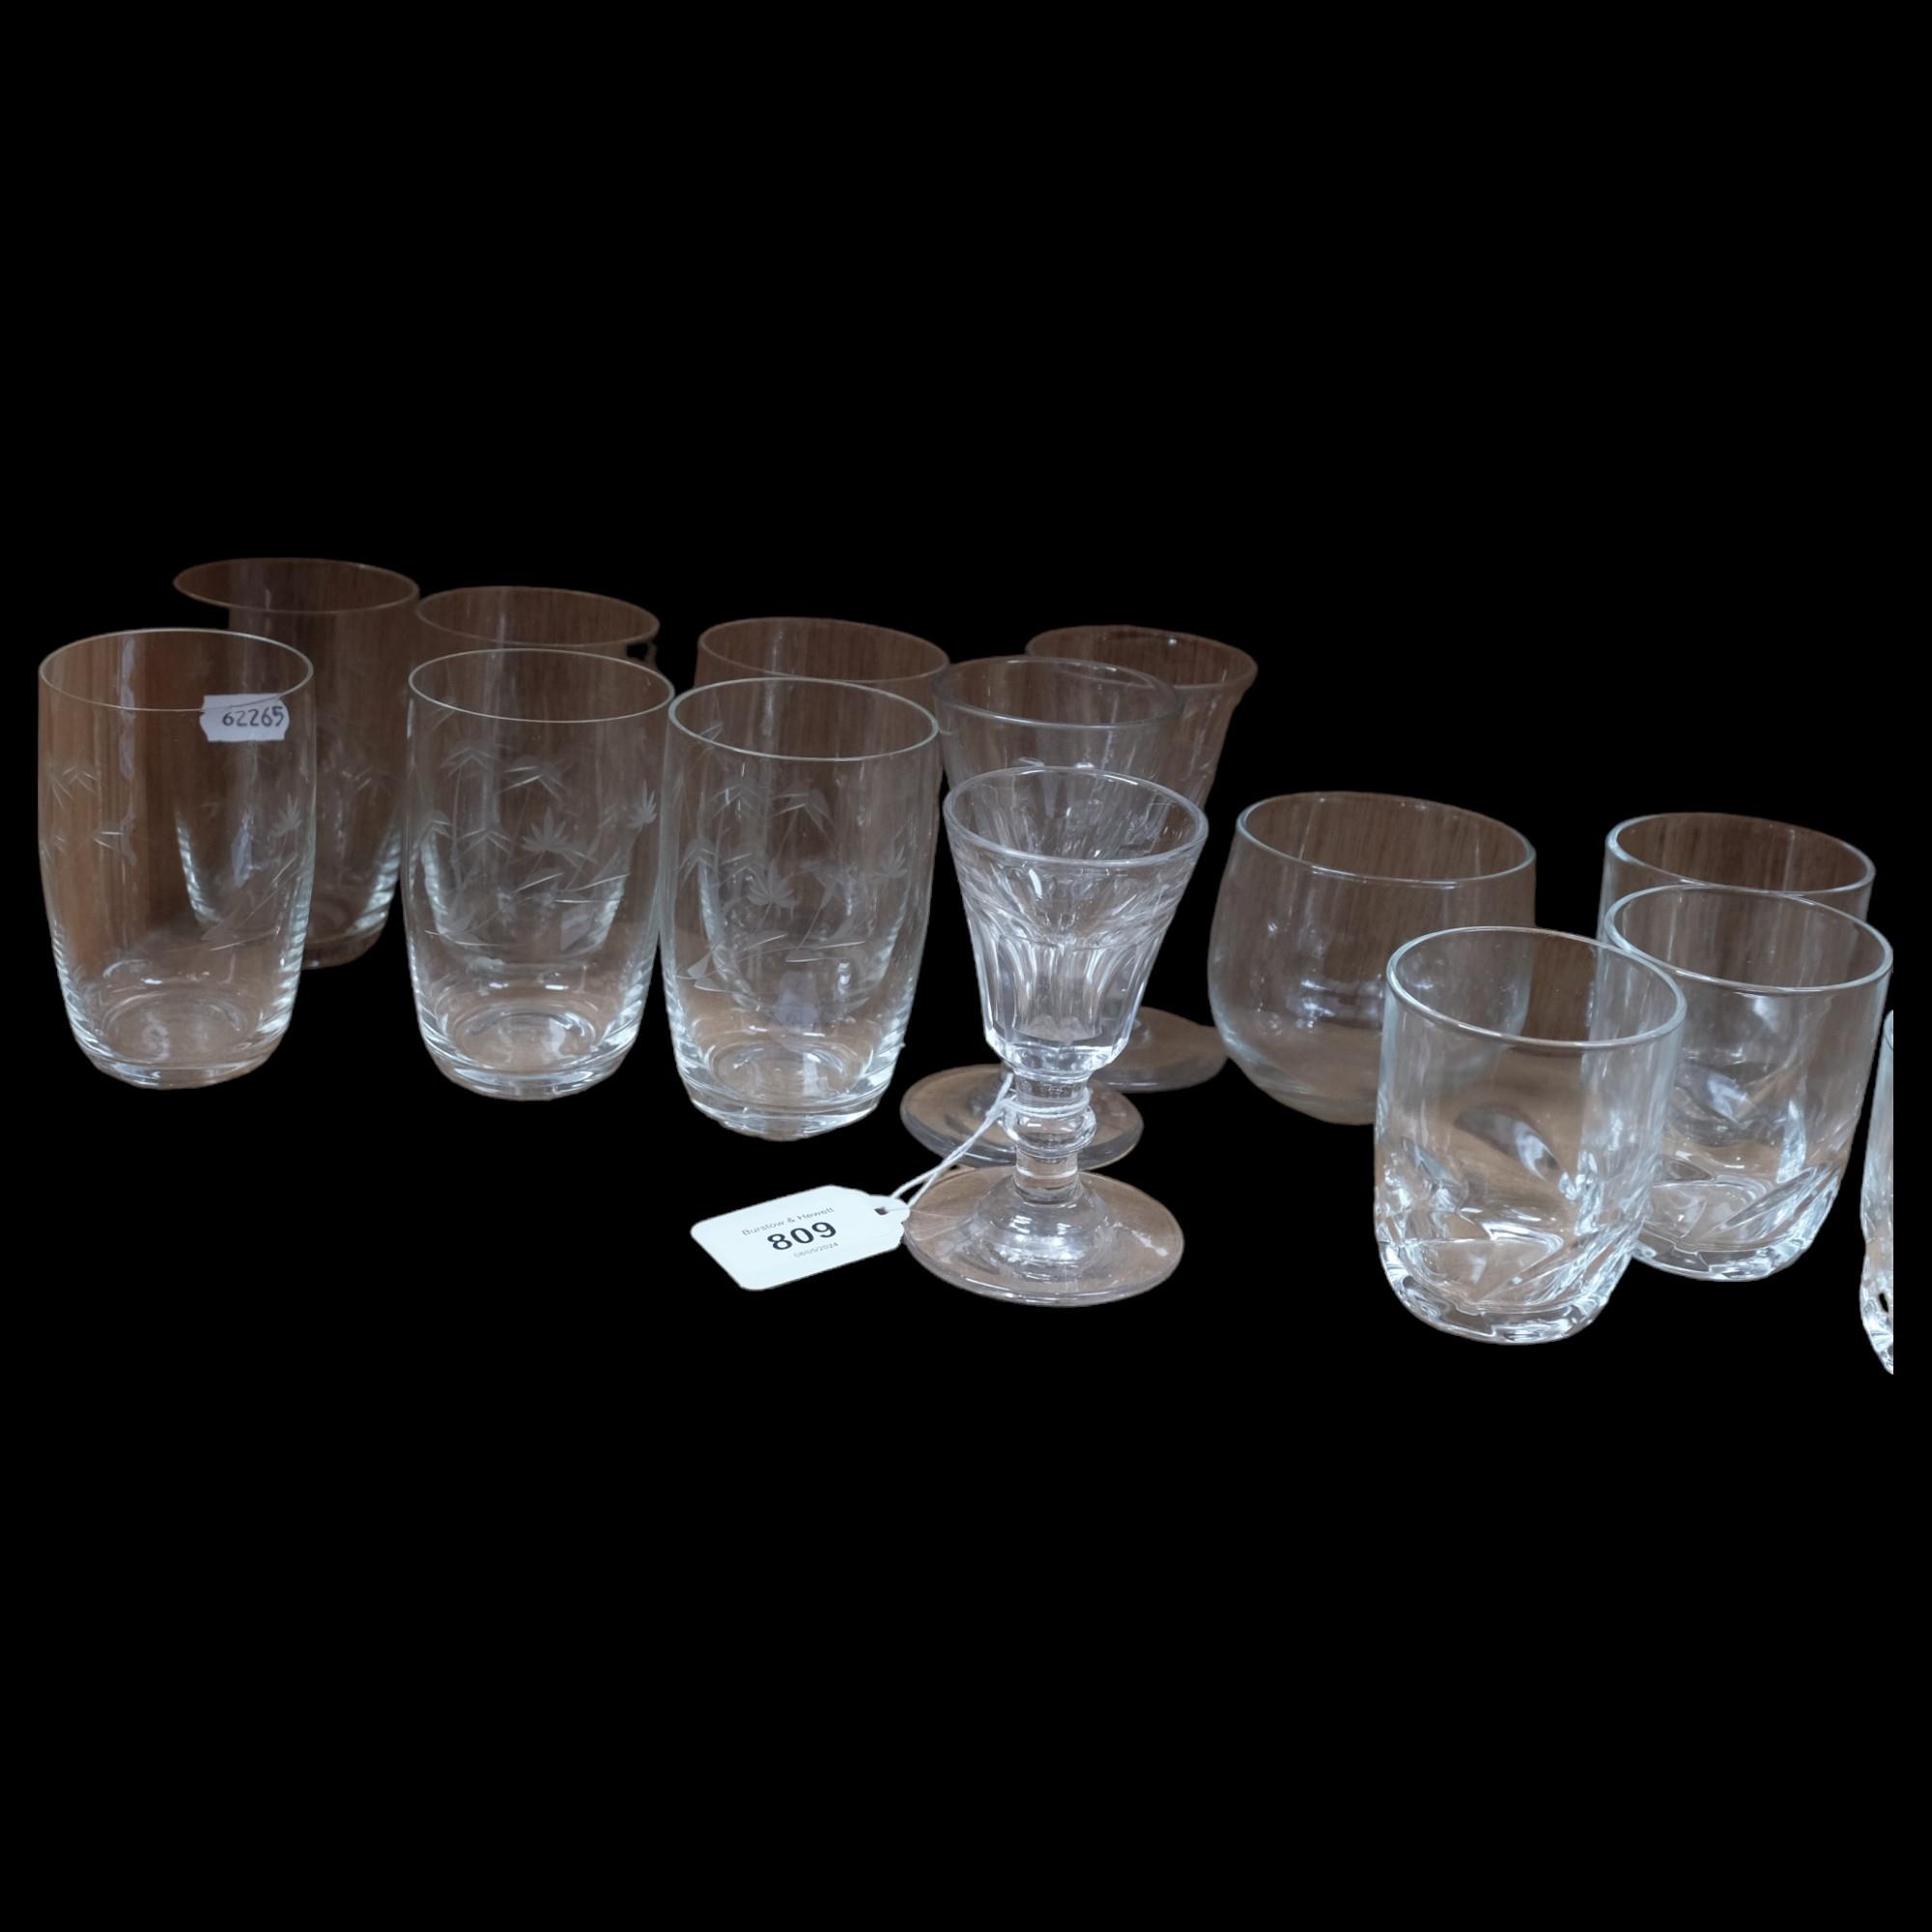 A set of 6 engraved glass beakers, 10cm, panel cut goblets, and other drinking glasses